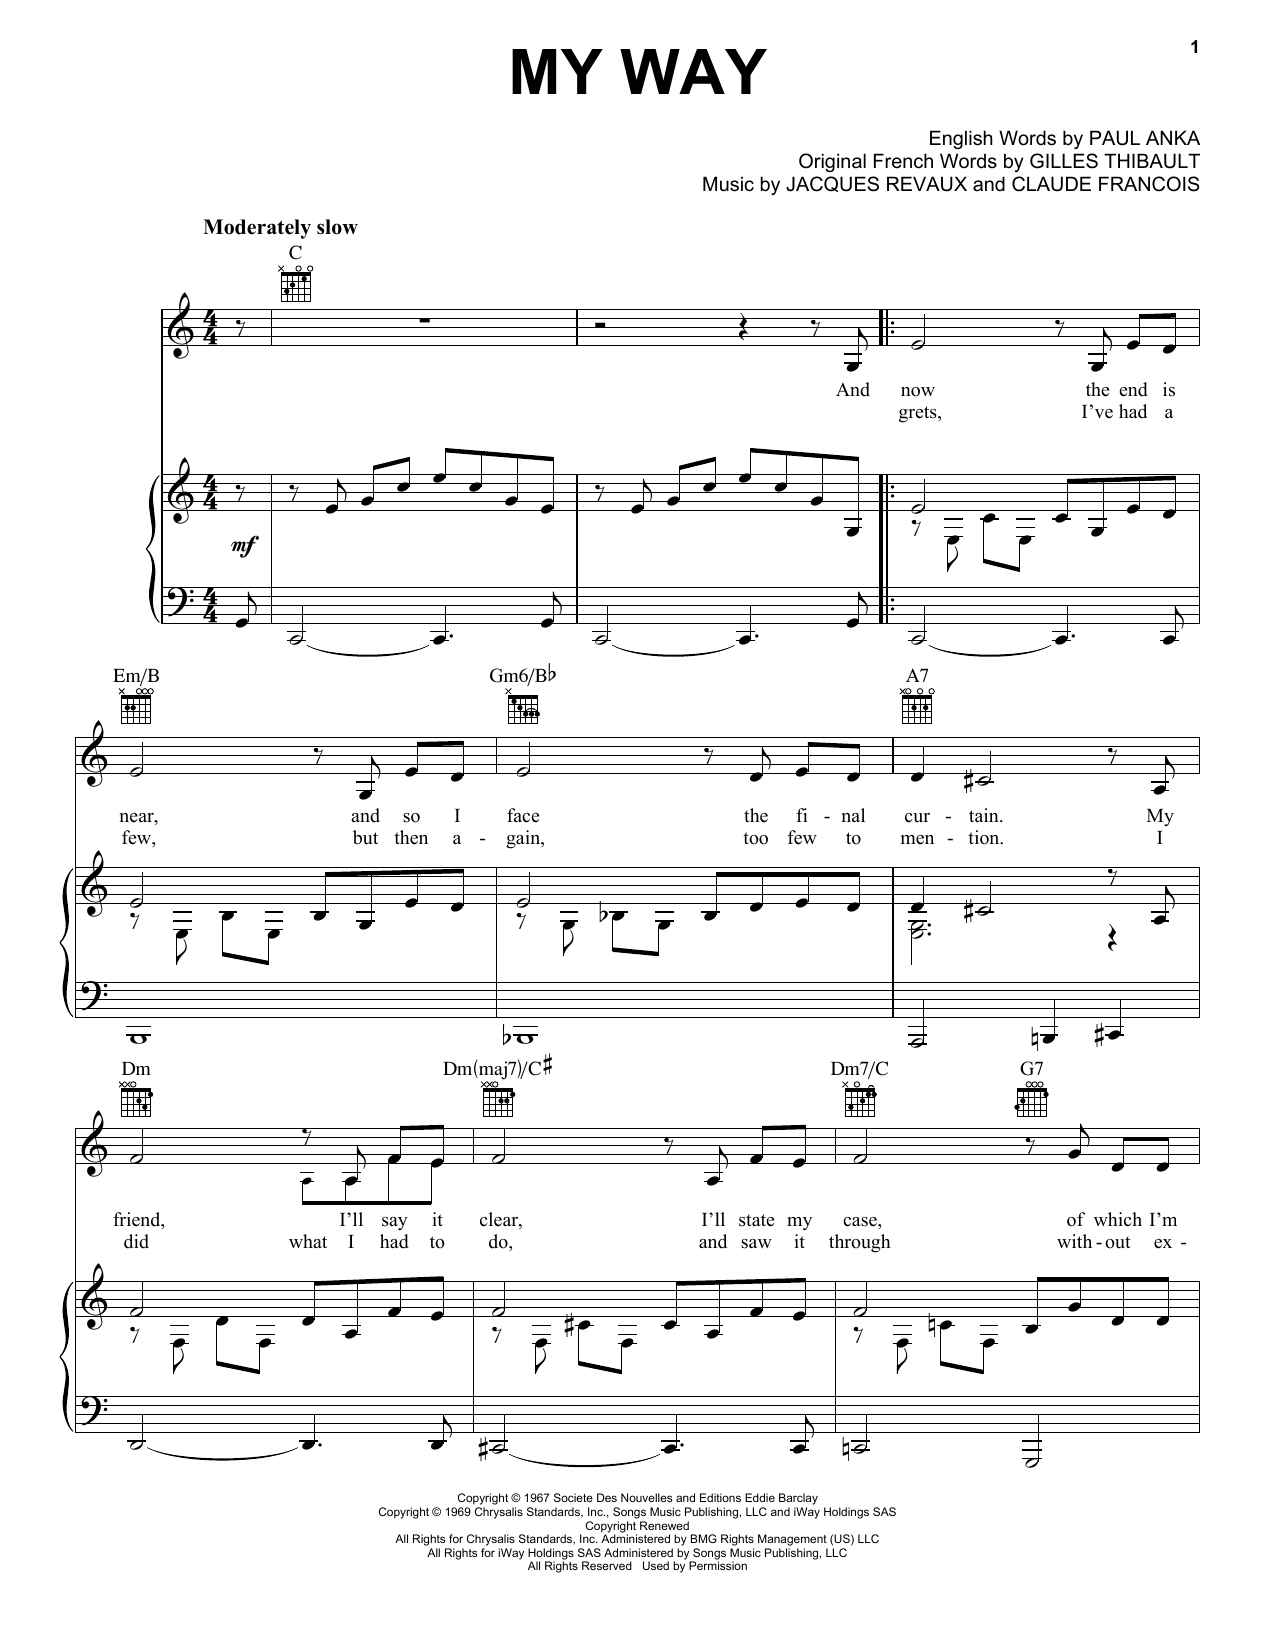 Elvis Presley My Way sheet music notes and chords. Download Printable PDF.